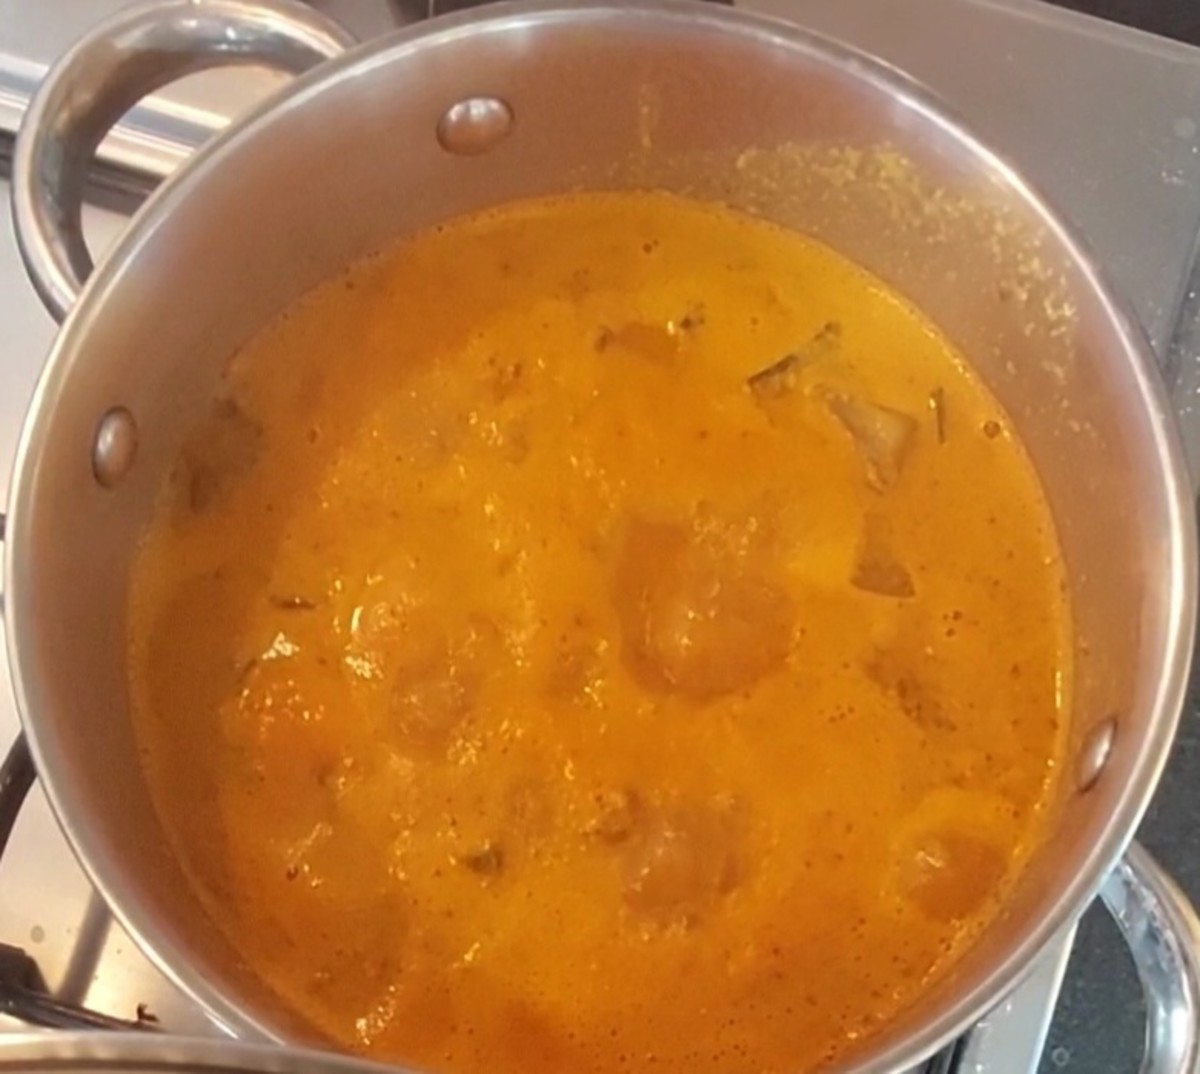 Mix to combine the masala with the vegetables. Add more water if required to adjust the consistency. Adjust salt. Close the lid and cook over medium flame for 5 minutes, or till raw smell of the masala and tamarind goes away. Switch off the flame. 